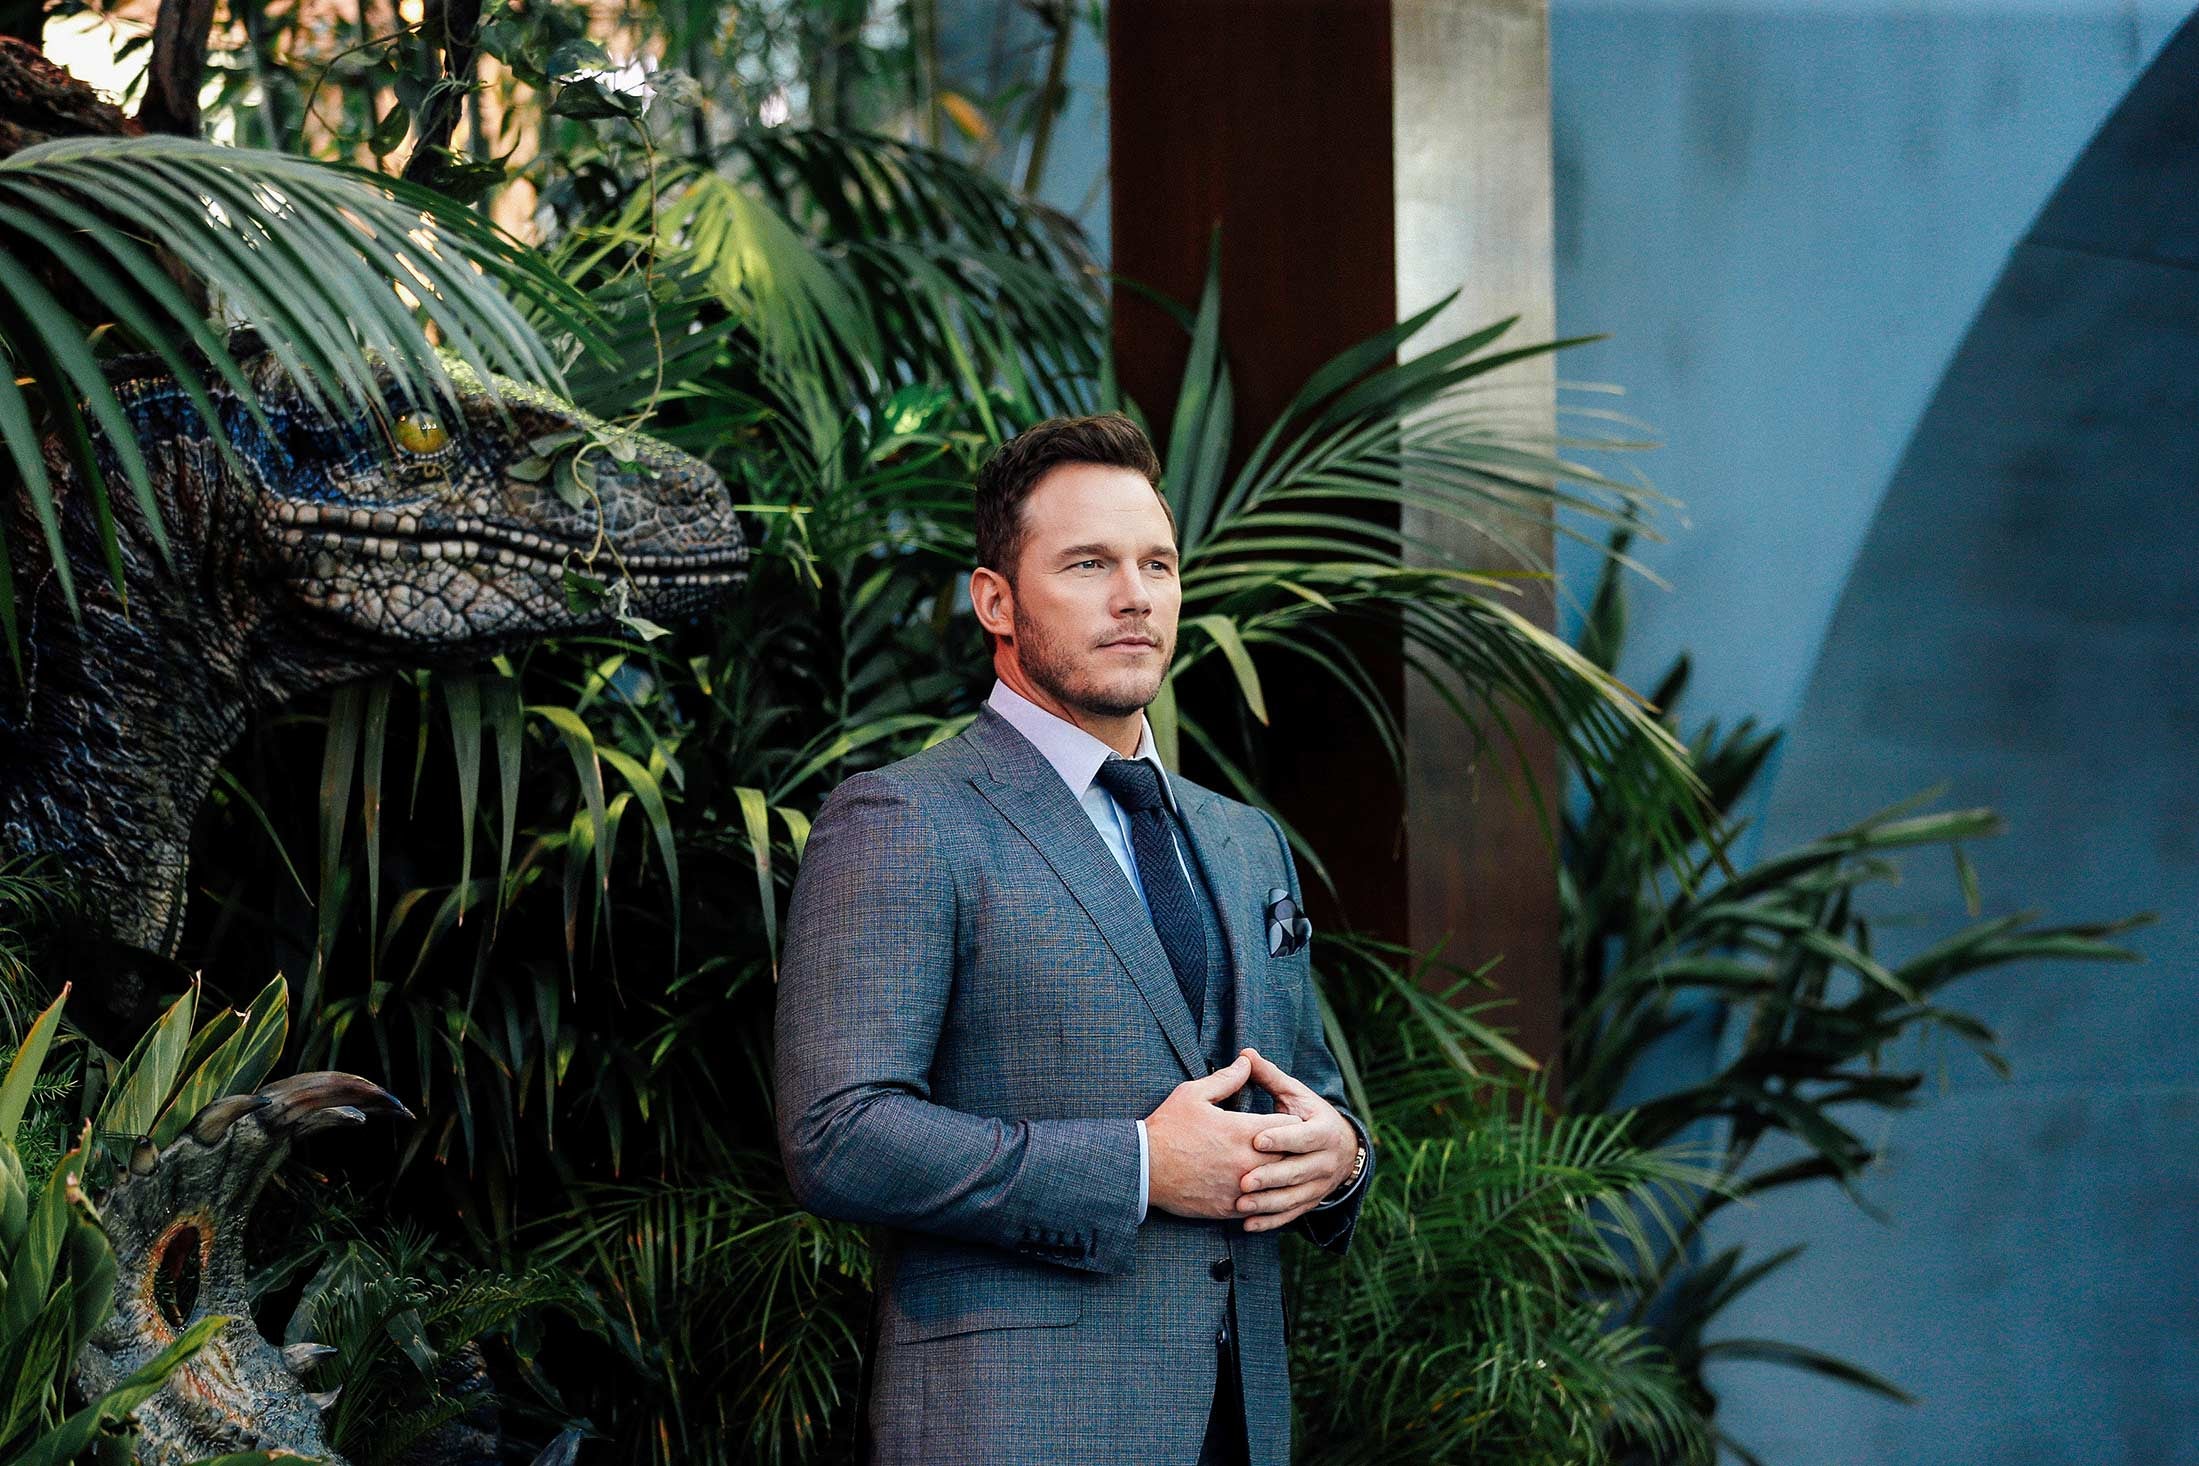 Chris Pratt stands looking solemn, wearing a suit with hands touching and thumbs tented, in front of a backdrop of tropical plants.